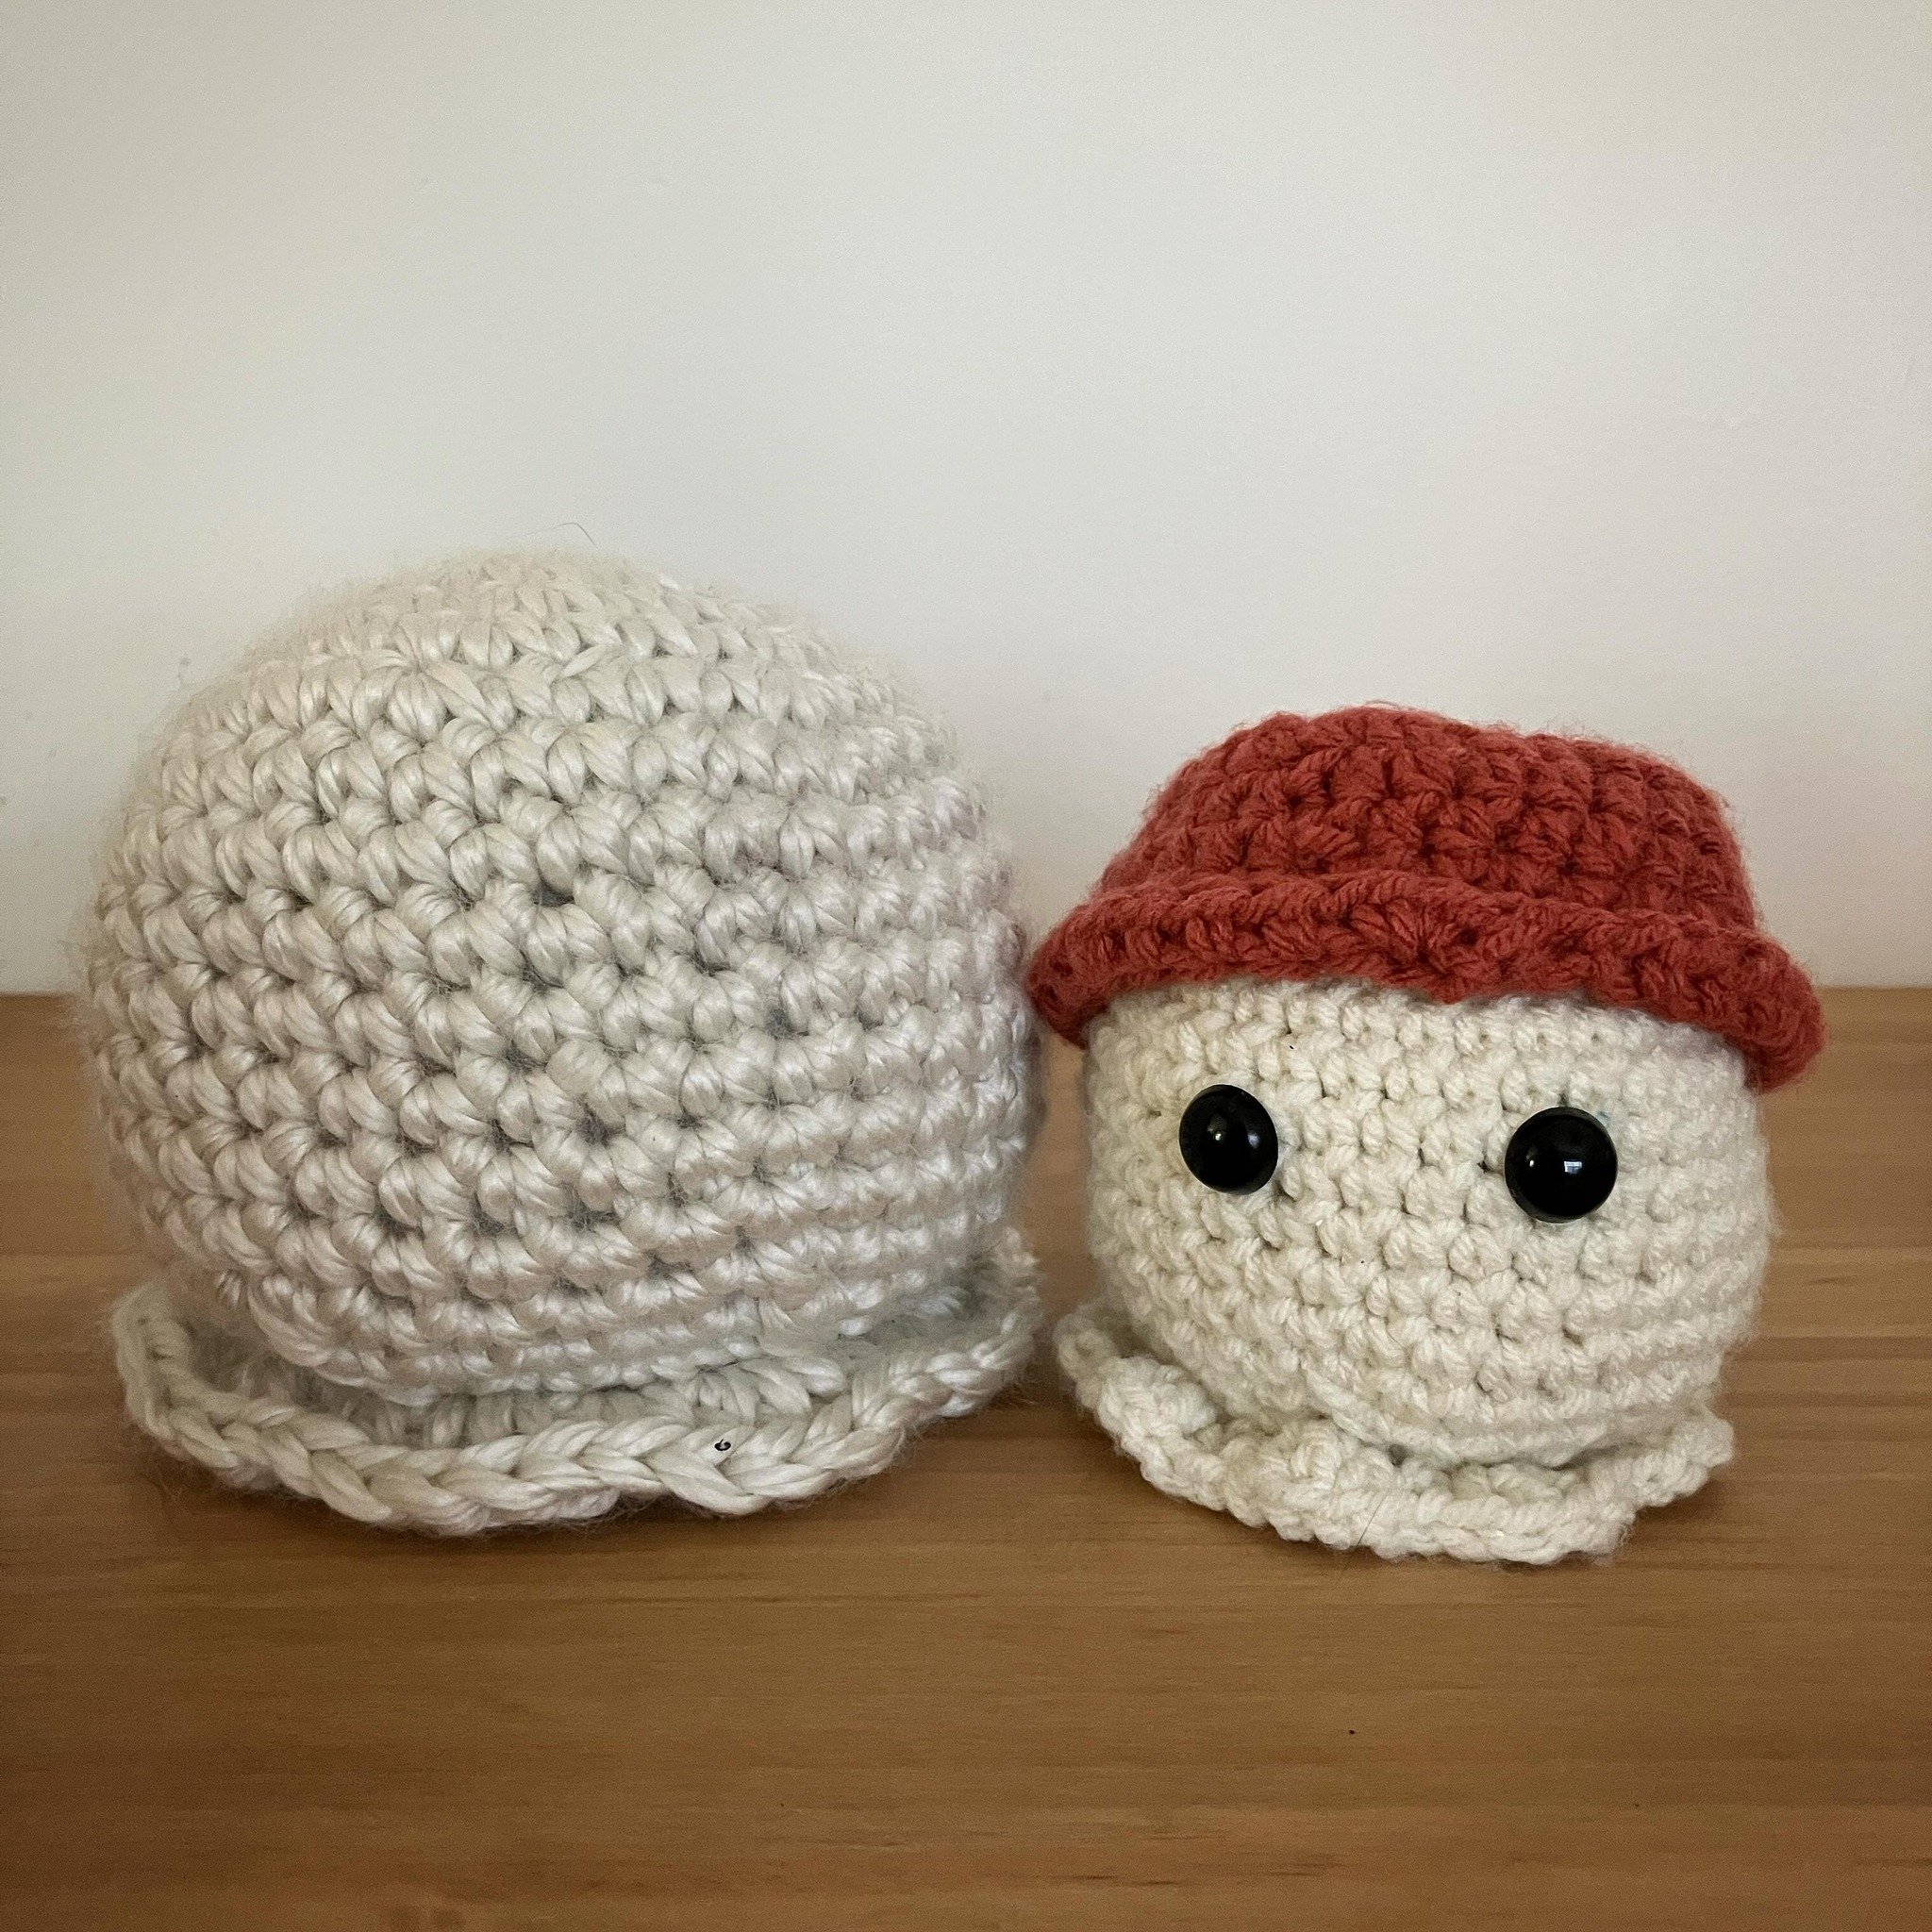 At MKTG 280&rsquo;s suggestion, we&rsquo;re starting to experiment with different product variations, like this big boi made of super bulky, size 6 @lionbrandyarn.

What should we use for eyes? Drop us a comment if you have a suggestion. 

#crochet #